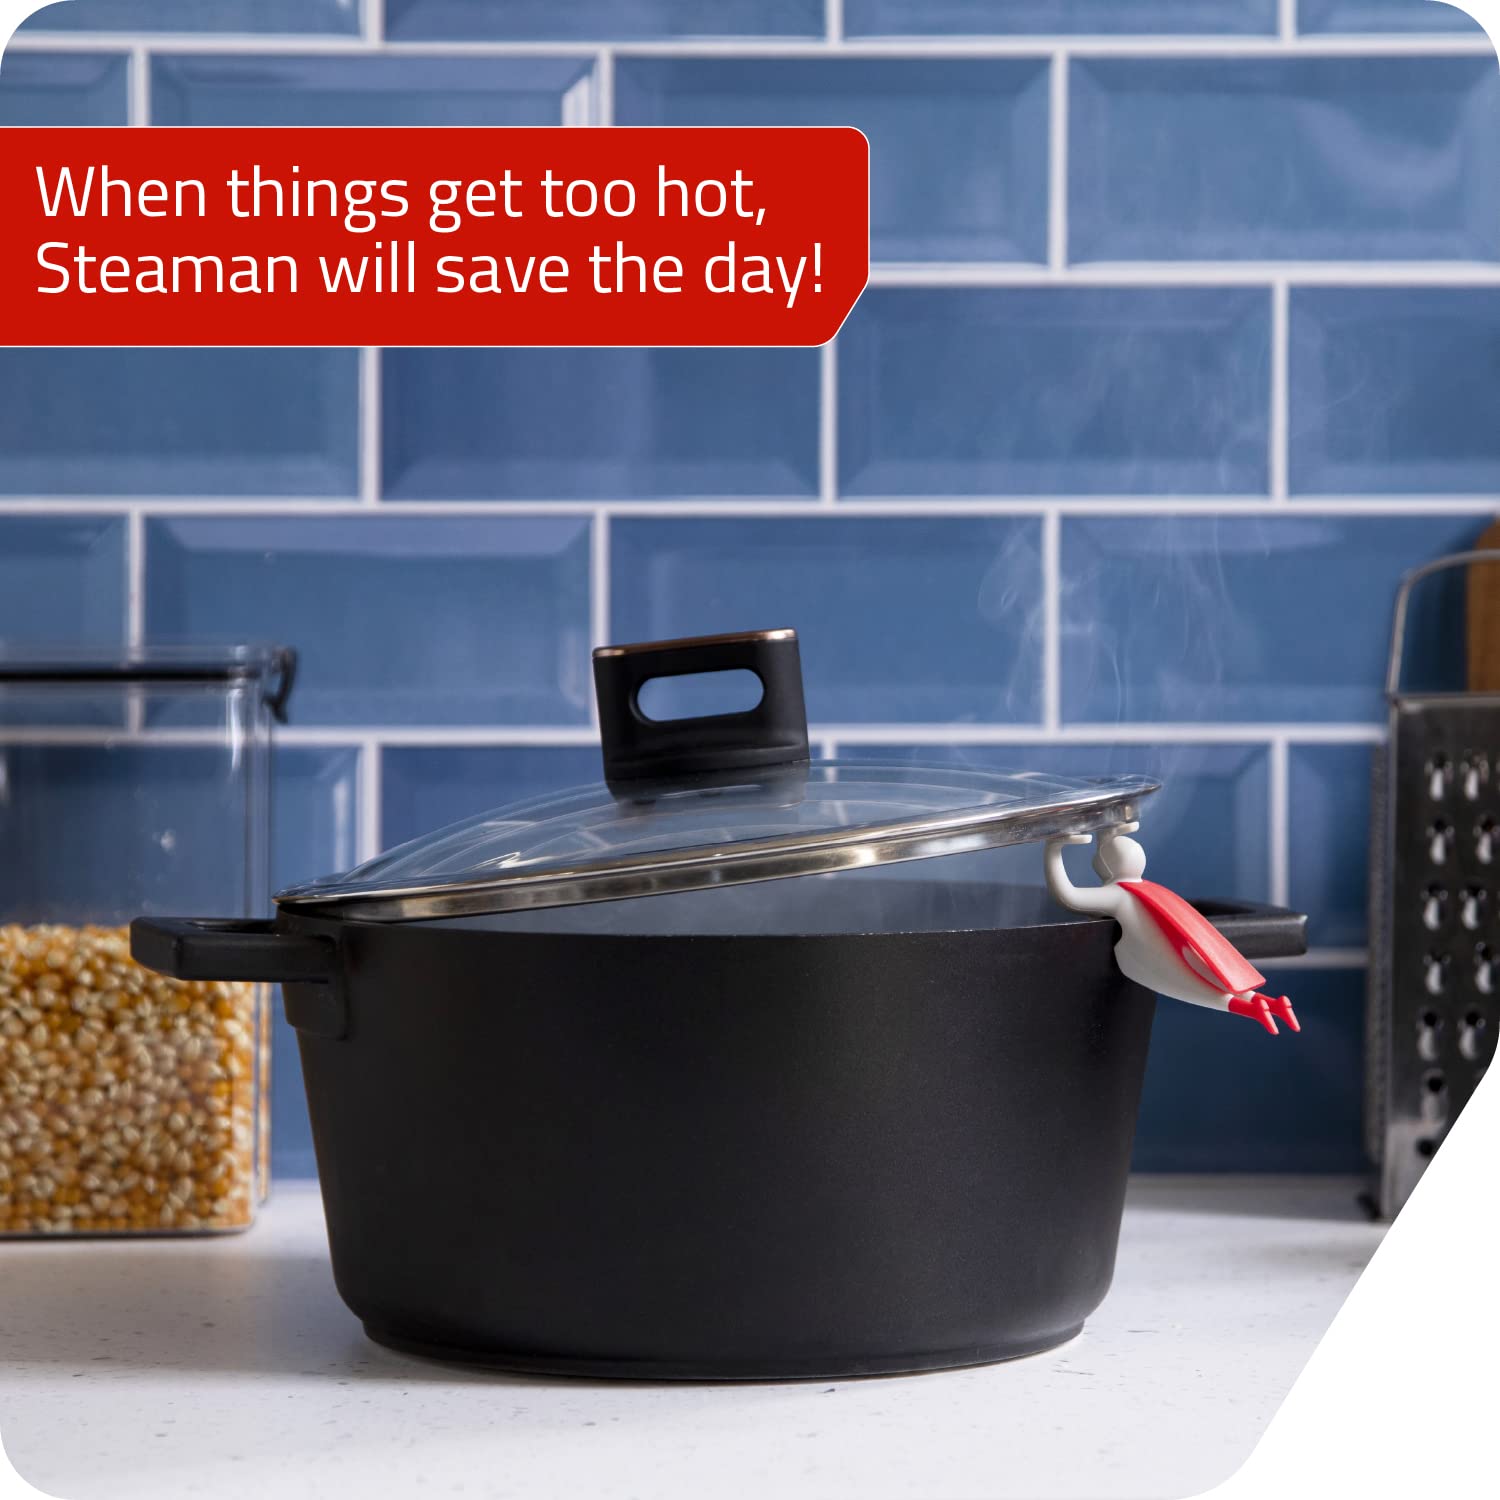 Steaman: Steam Releaser for Pot Top and Edge-Sitting Spoon Holder | Superhero-Themed Steam Releaser to Keep the Lid Slightly Lifted and Help Reduce Sauces | Cute Kitchen Accessories by Peleg Design